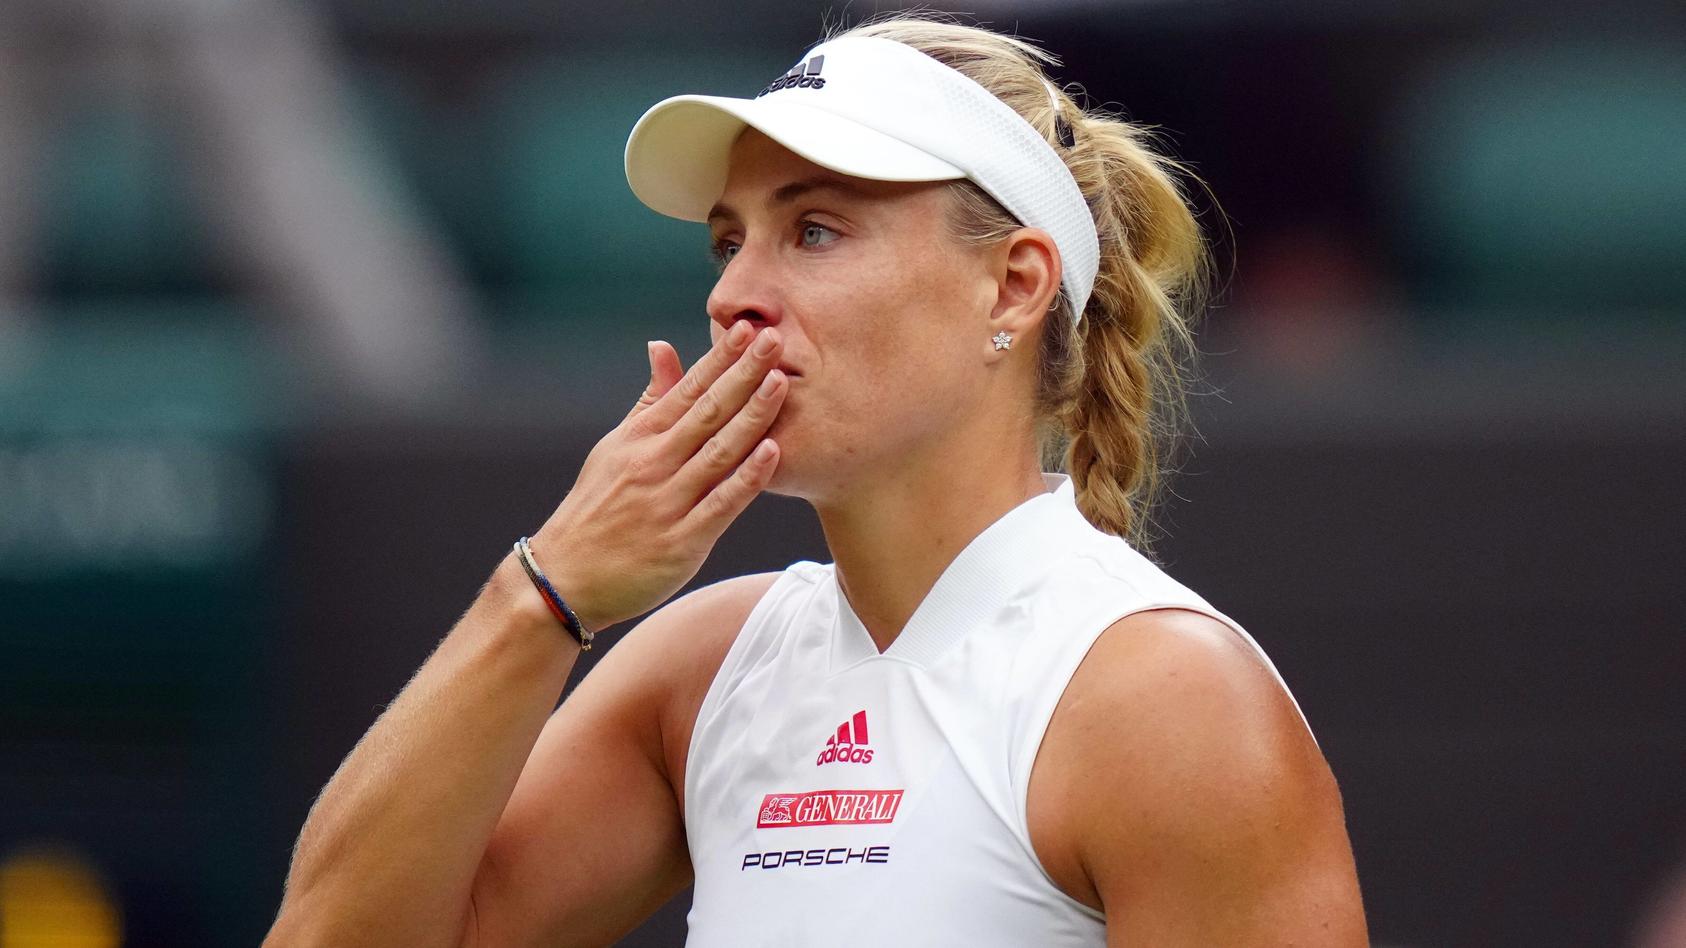 Mandatory Credit: Photo by Shutterstock 12197712cc Angelique Kerber celebrates victory in her quarter-final match Wimbledon Tennis Championships, Day 8, The All England Lawn Tennis and Croquet Club, London, UK - 06 Jul 2021 Wimbledon Tennis Champions